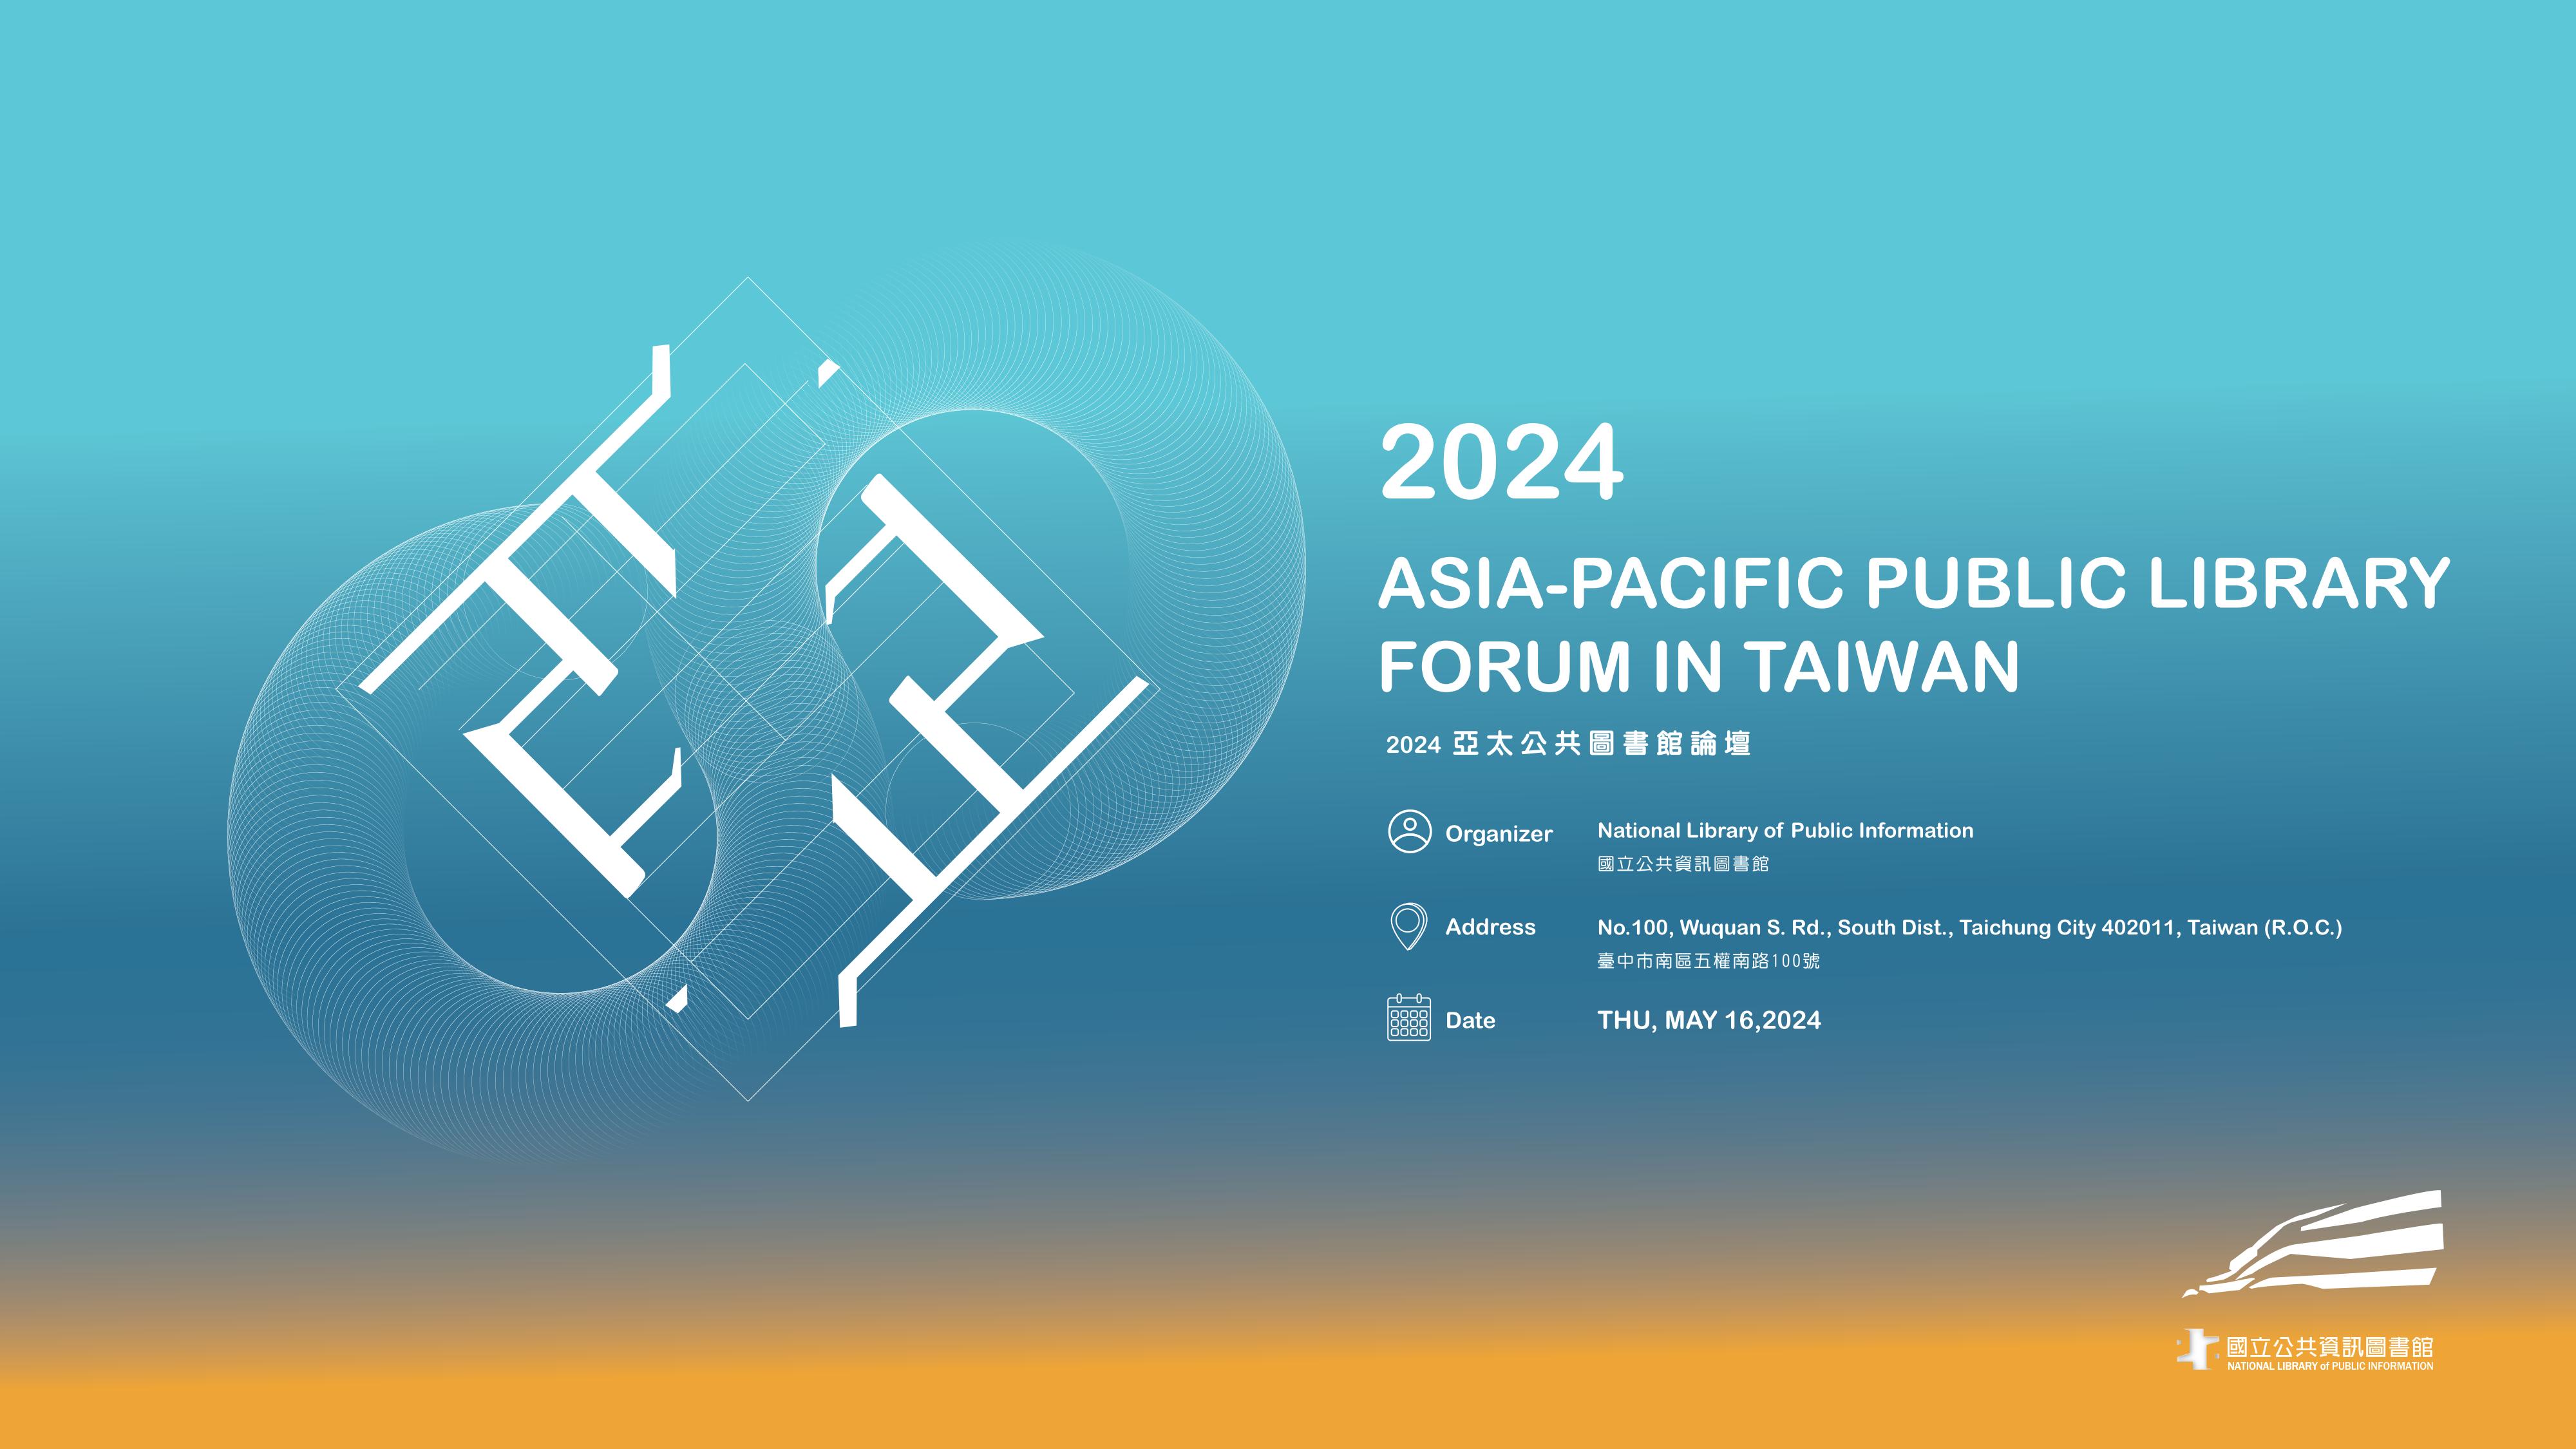 The 2024 Asia-Pacific Public Library